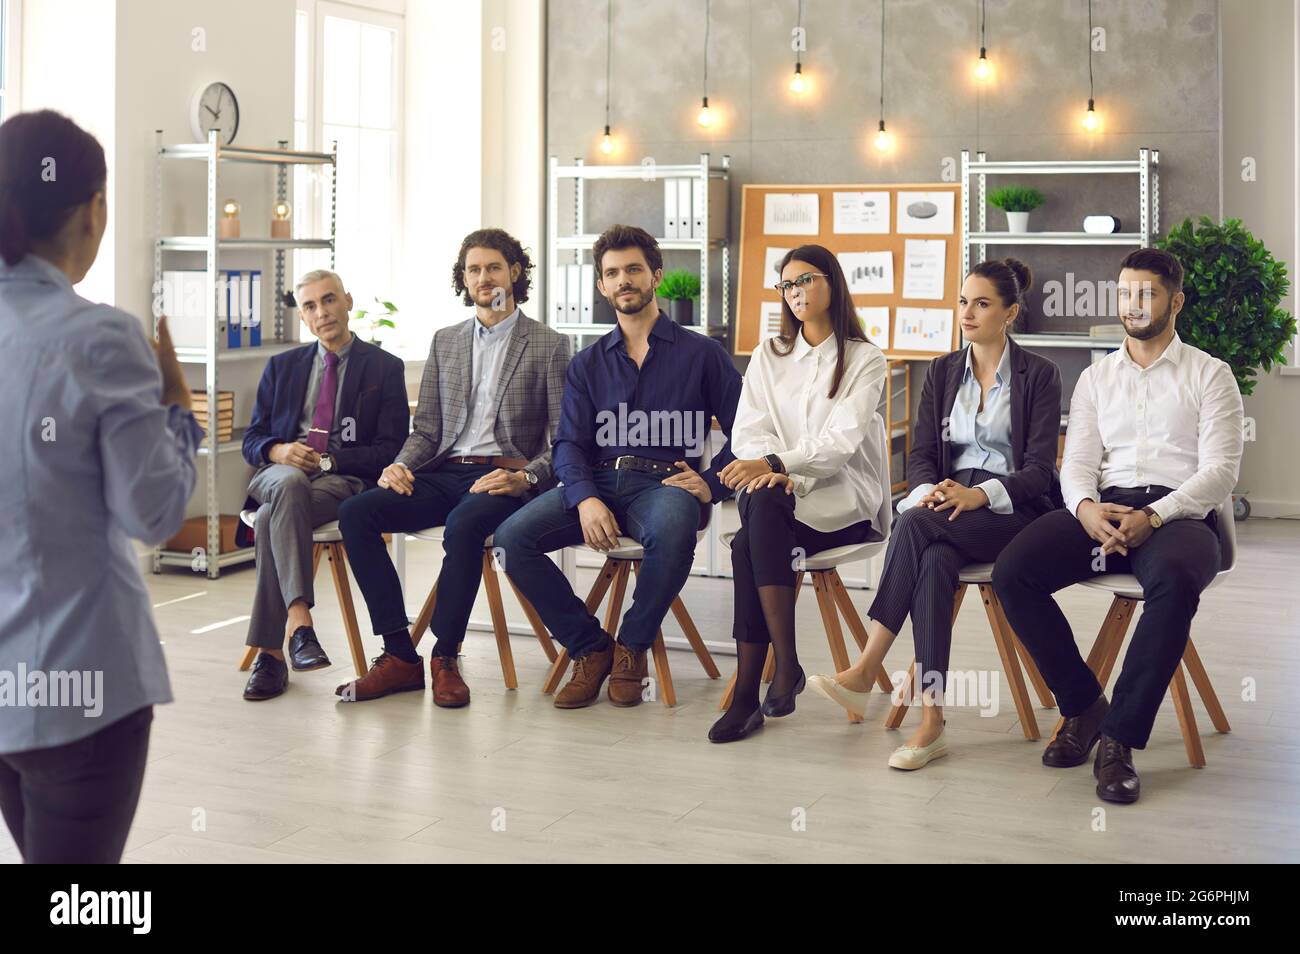 Group of diverse employees who listen intently to their female colleague at a business meeting. Stock Photo